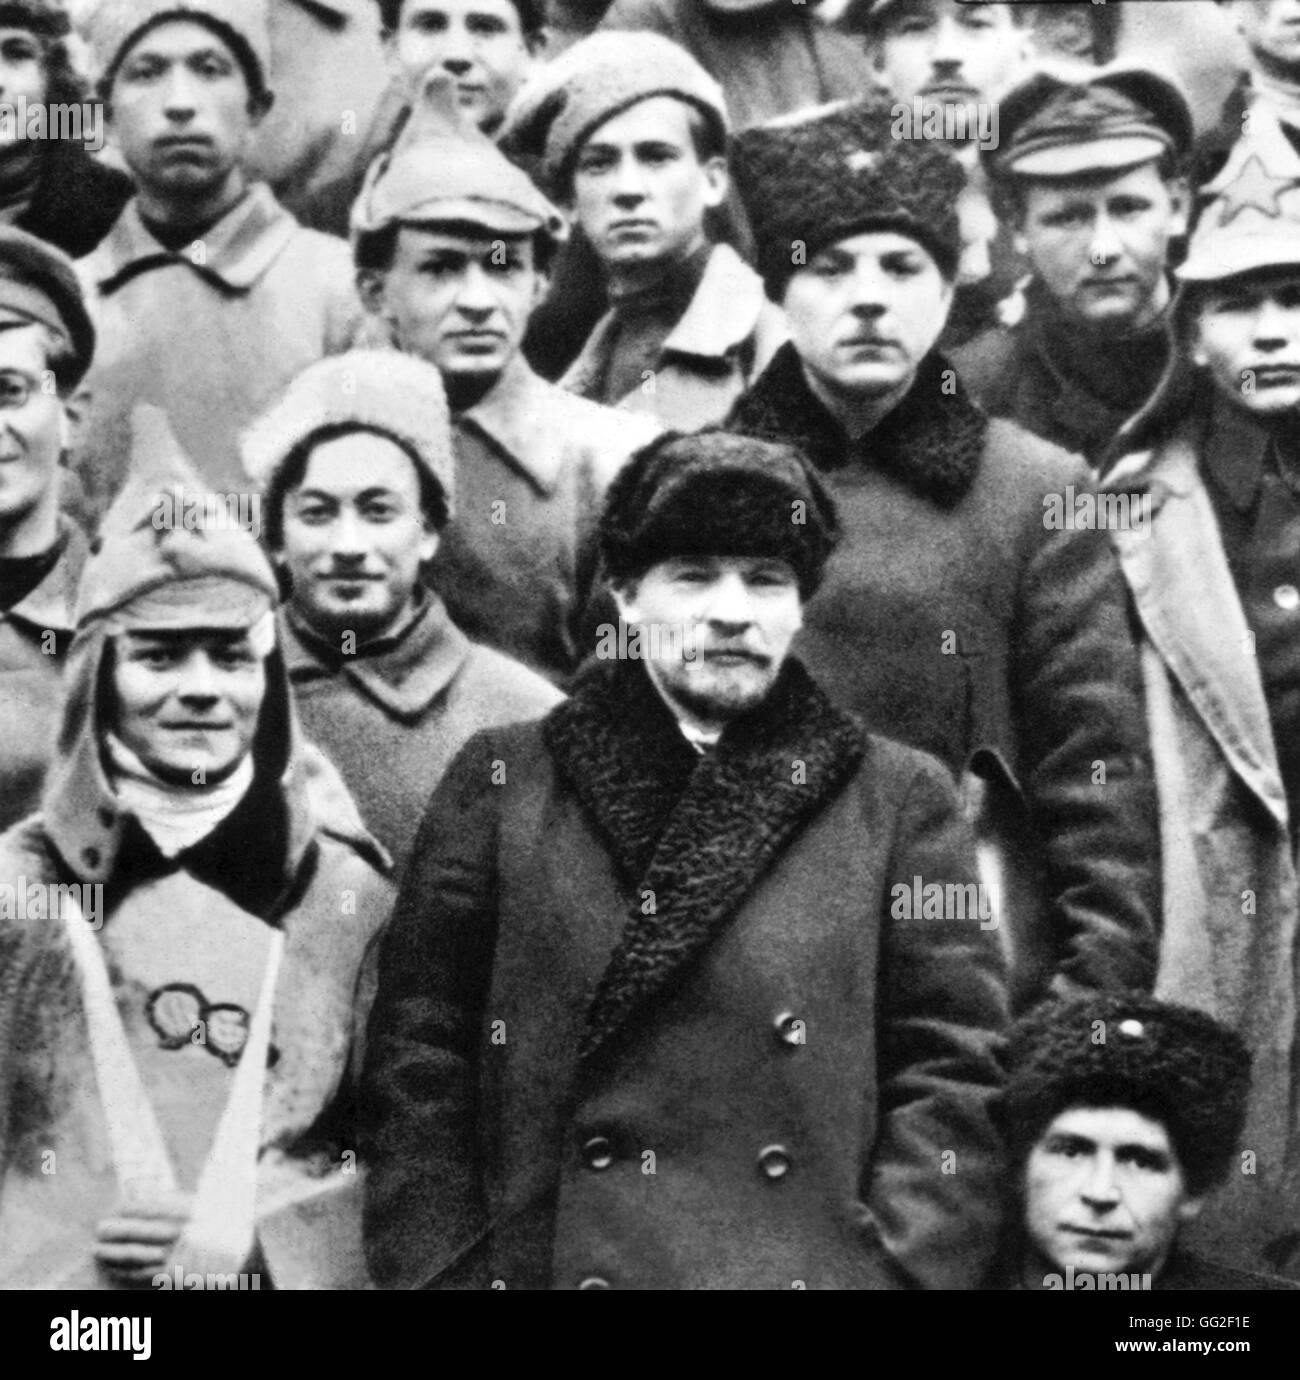 Moscow. Lenin and Vorachilov among the delegates of the 10th Communist Party Congress (delegates who took part in the repression of the Kronstadt uprising) March 1921 U.S.S.R. Stock Photo